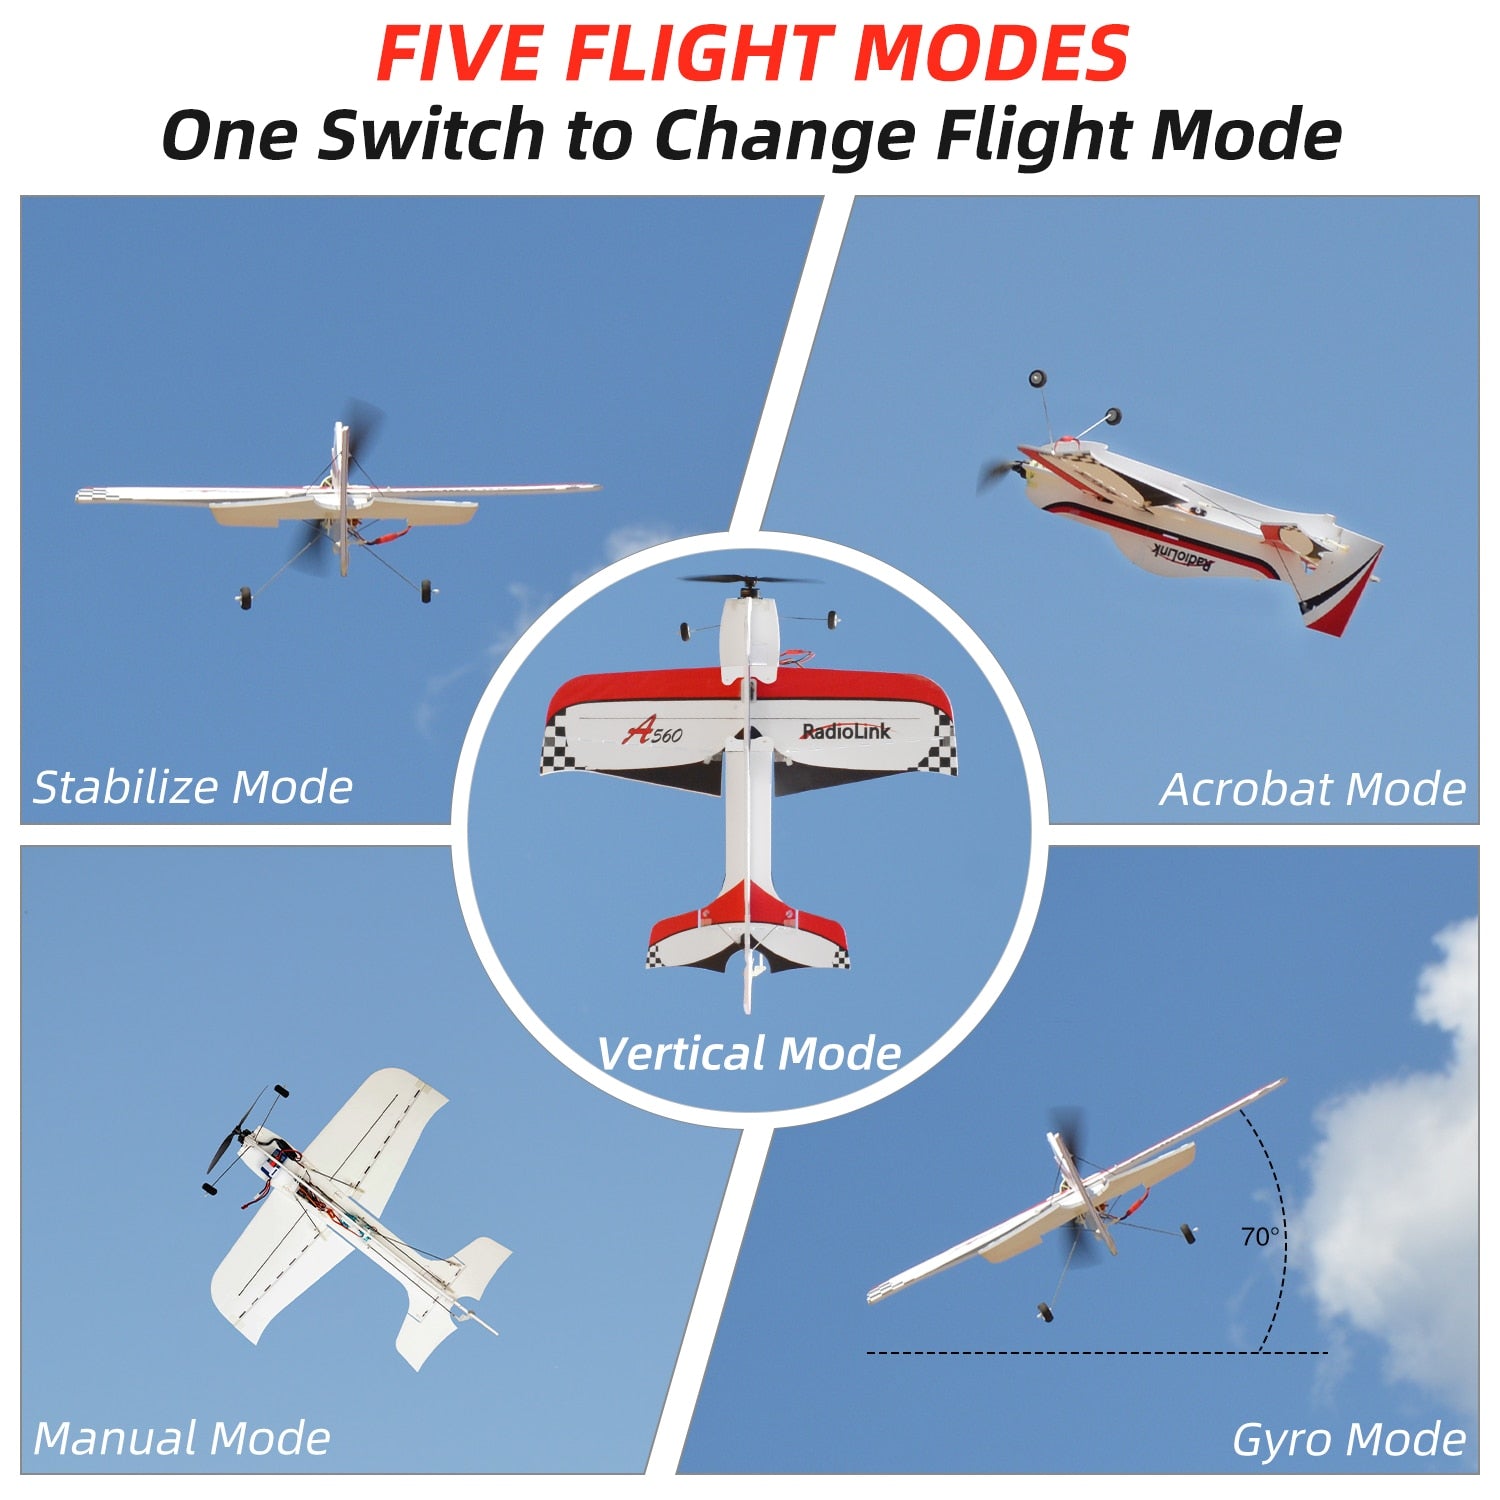 Radiolink A560 Airplane, FIVE FLIGHT MODES One Switch to Change Flight Mode 560 RadioLink Stabilize